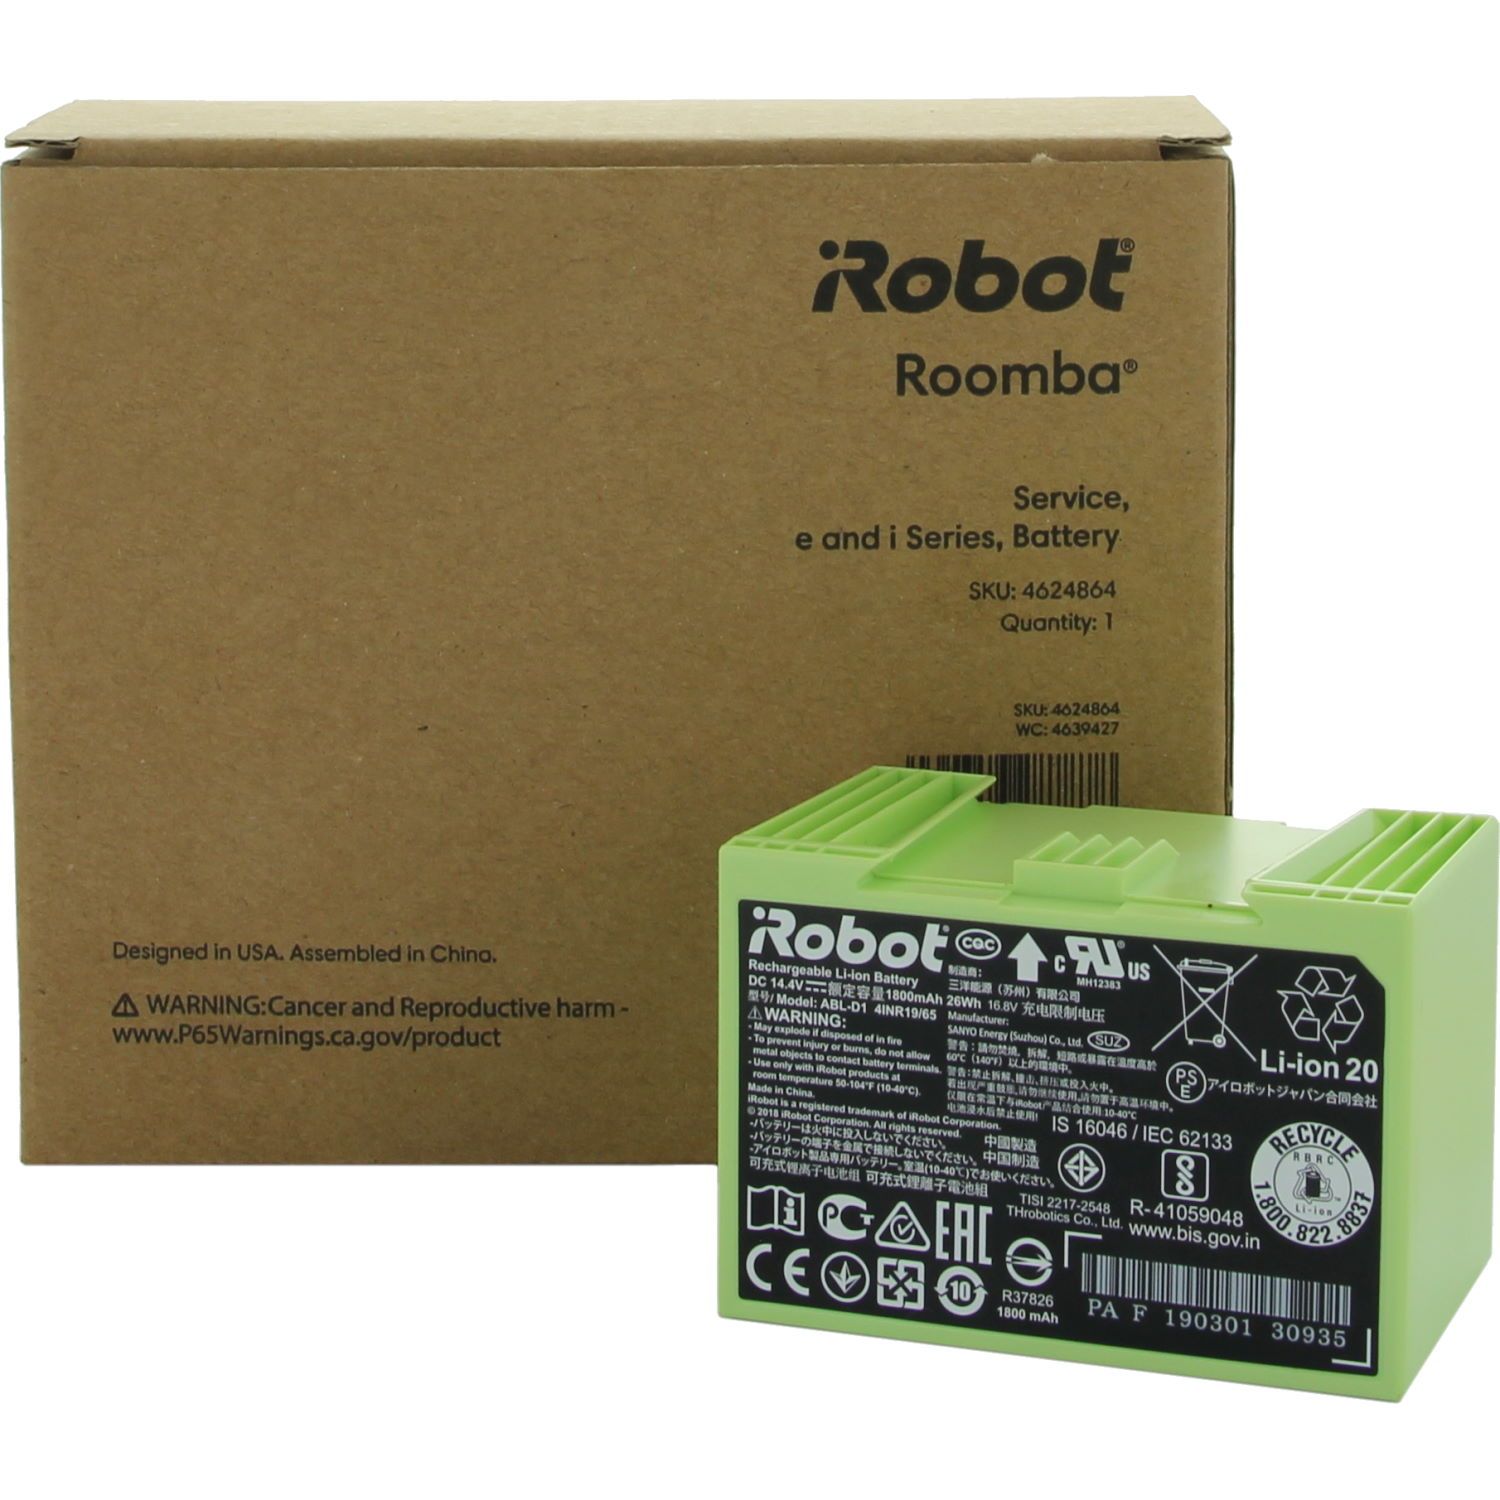 How to Change the Battery, Roomba® i and e series